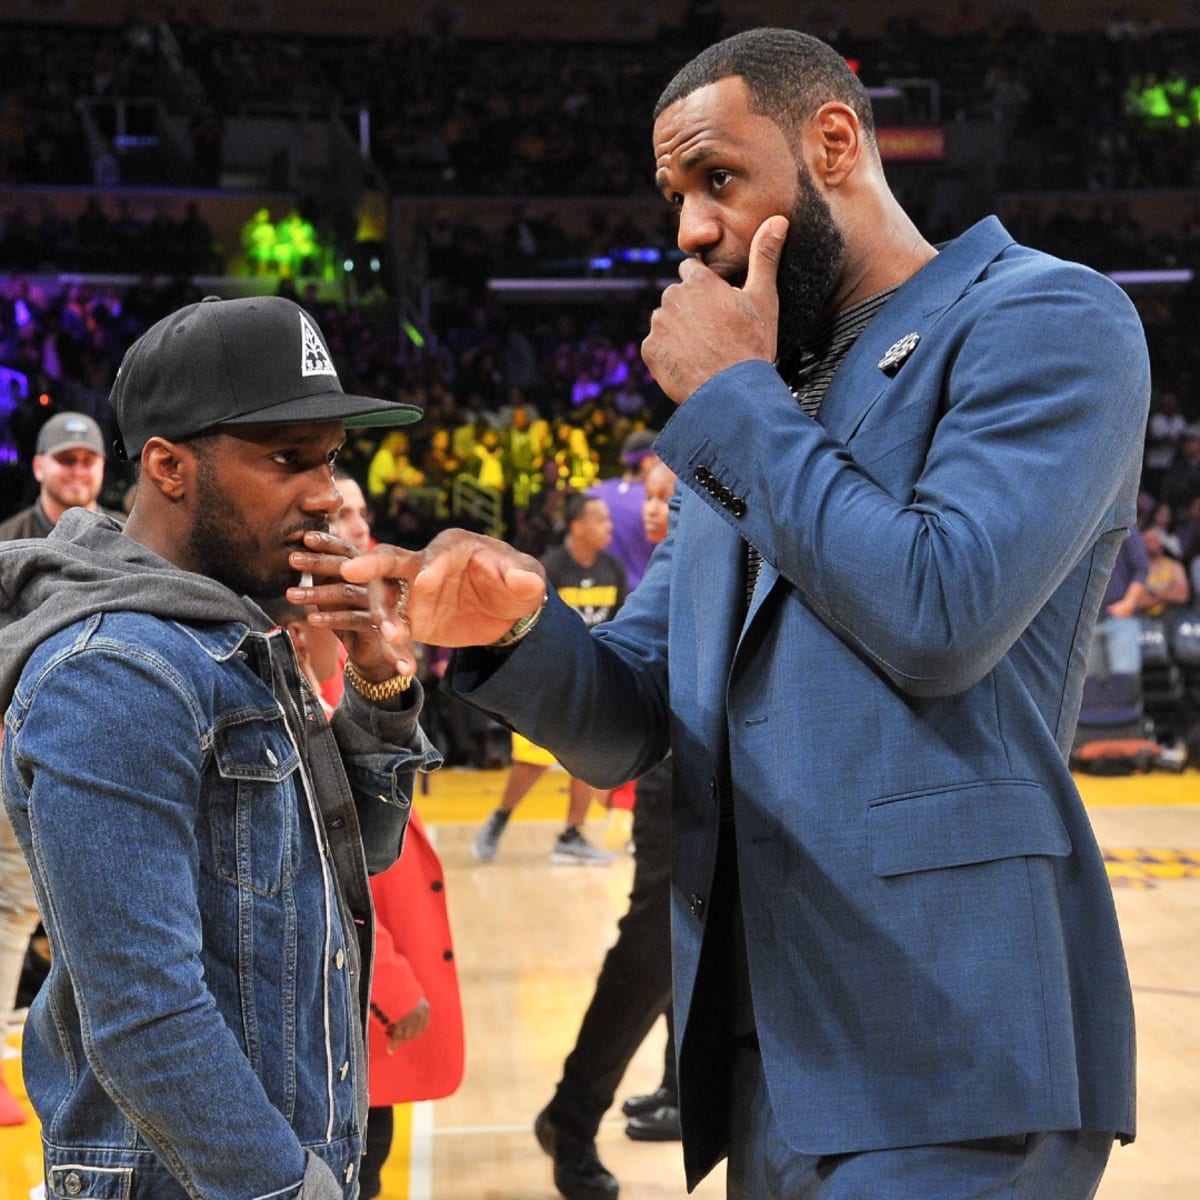 LeBron James Opens Up About Paul’s Key Role in His $400 Million Success